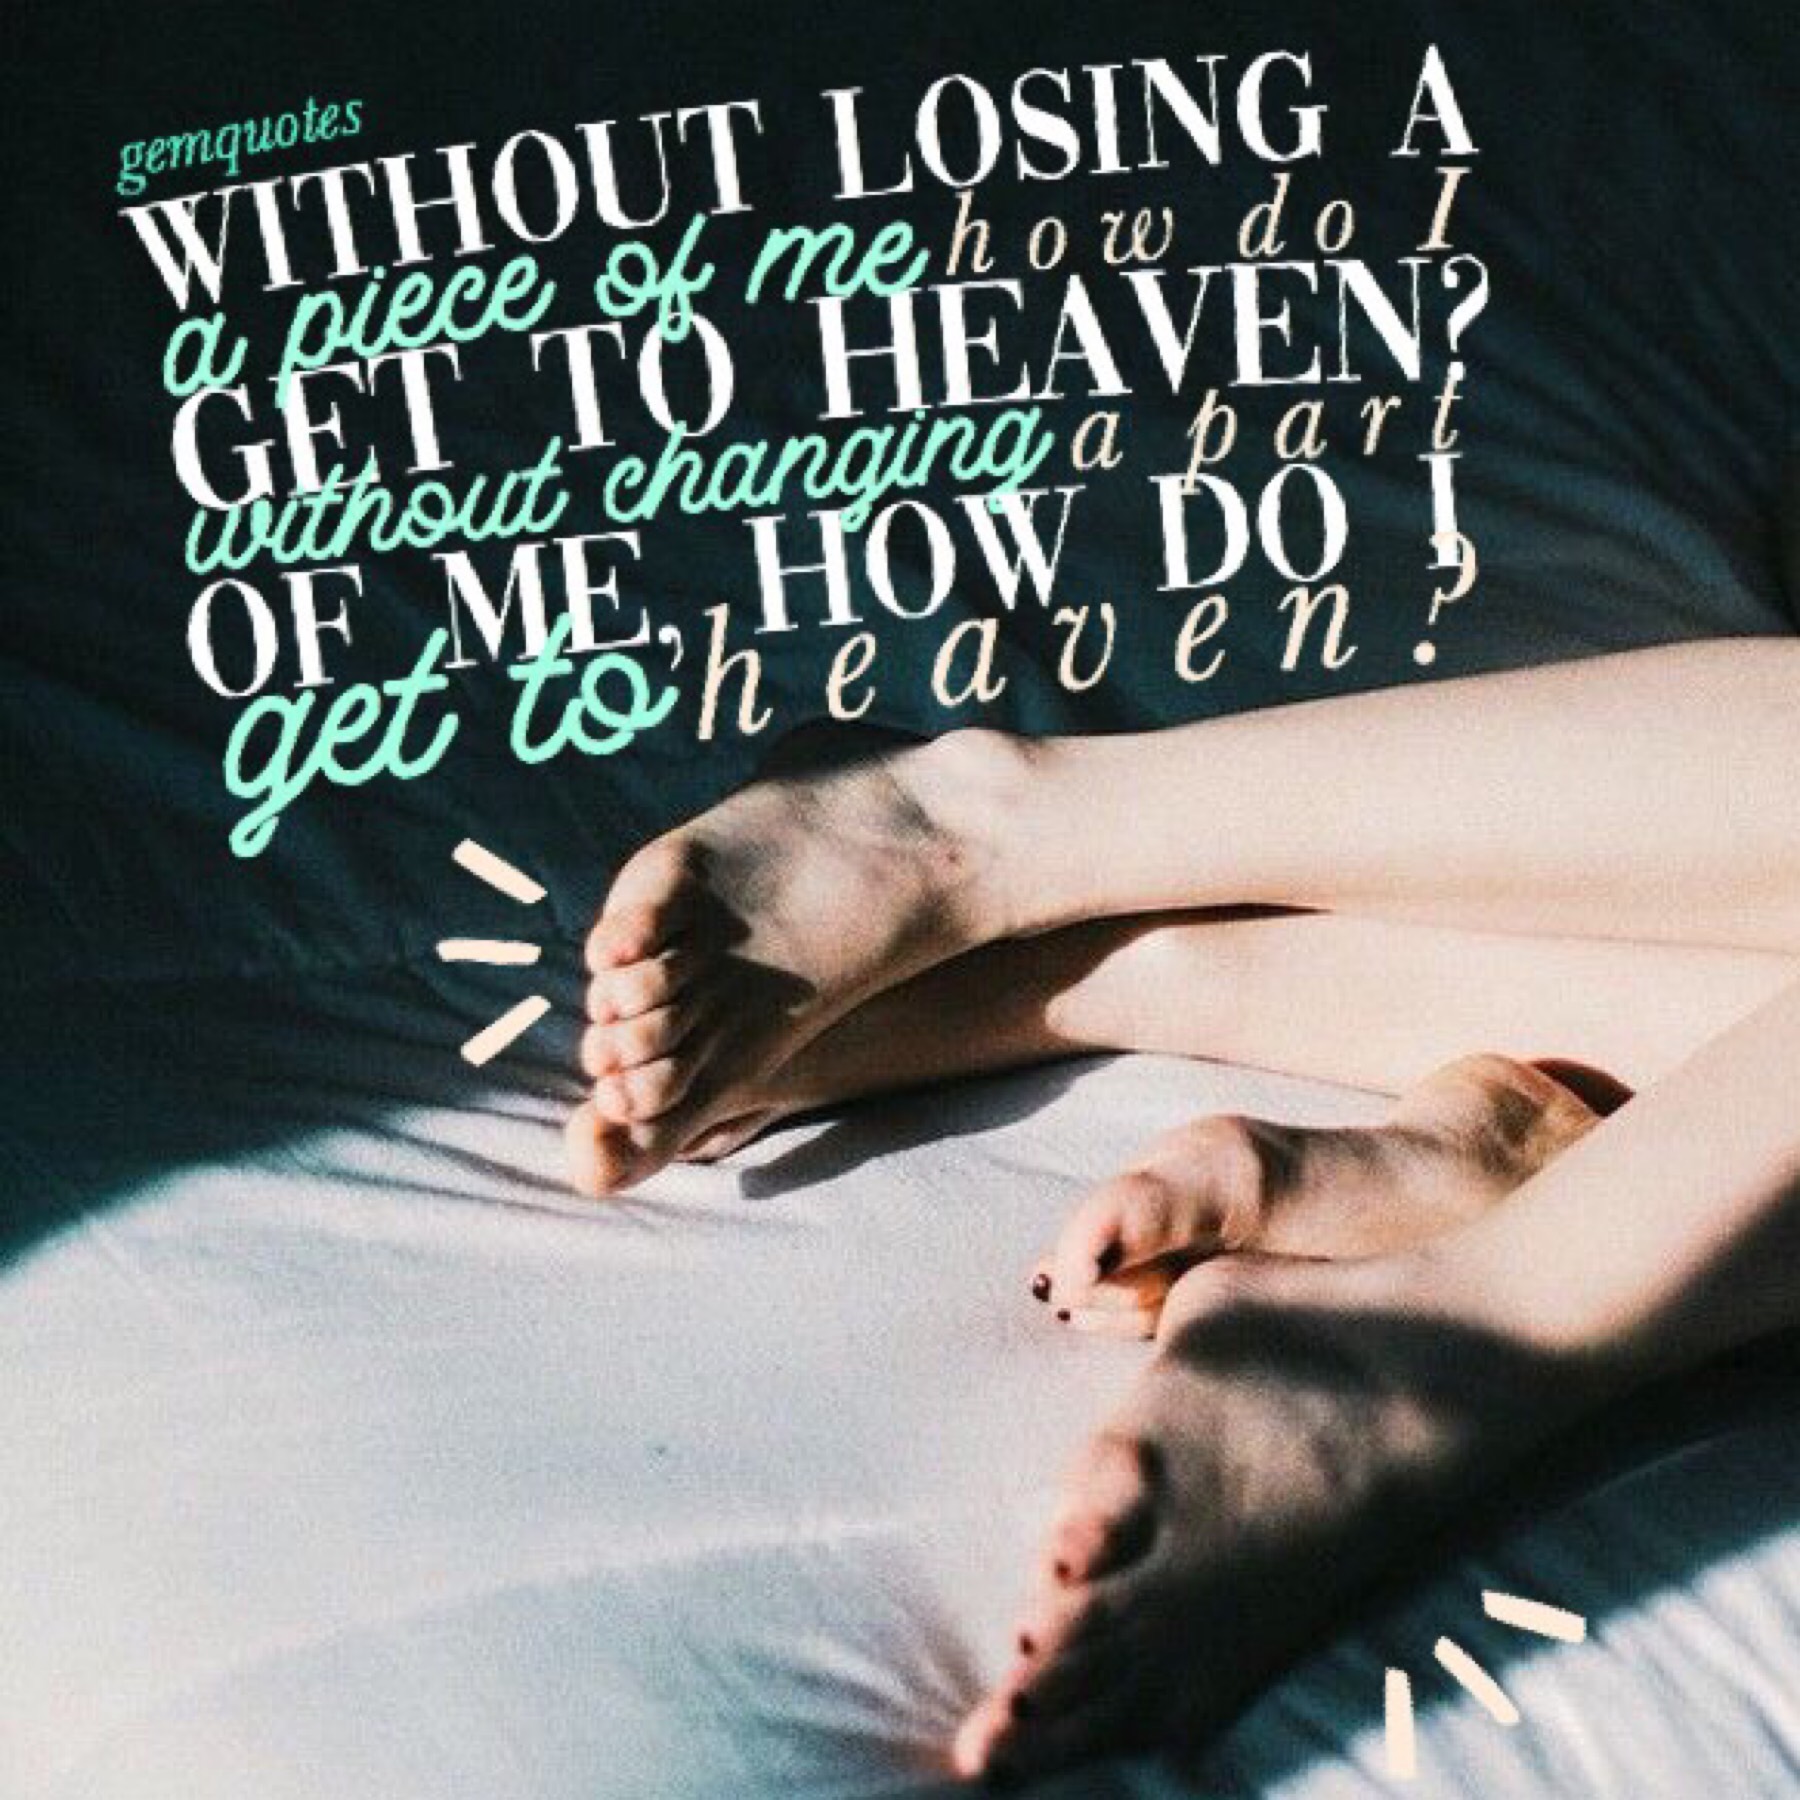 “🏳️‍🌈tap🏳️‍🌈”
“Heaven” by Troye Sivan. A beautiful song by a beautiful singer and BEAUTIFUL meaning. Another pride collage for all of u. Also, I have a writing contest going on~ so if ur interested, check that out! Sending summer vibes!!~~☀️🥵🏳️‍🌈❤️